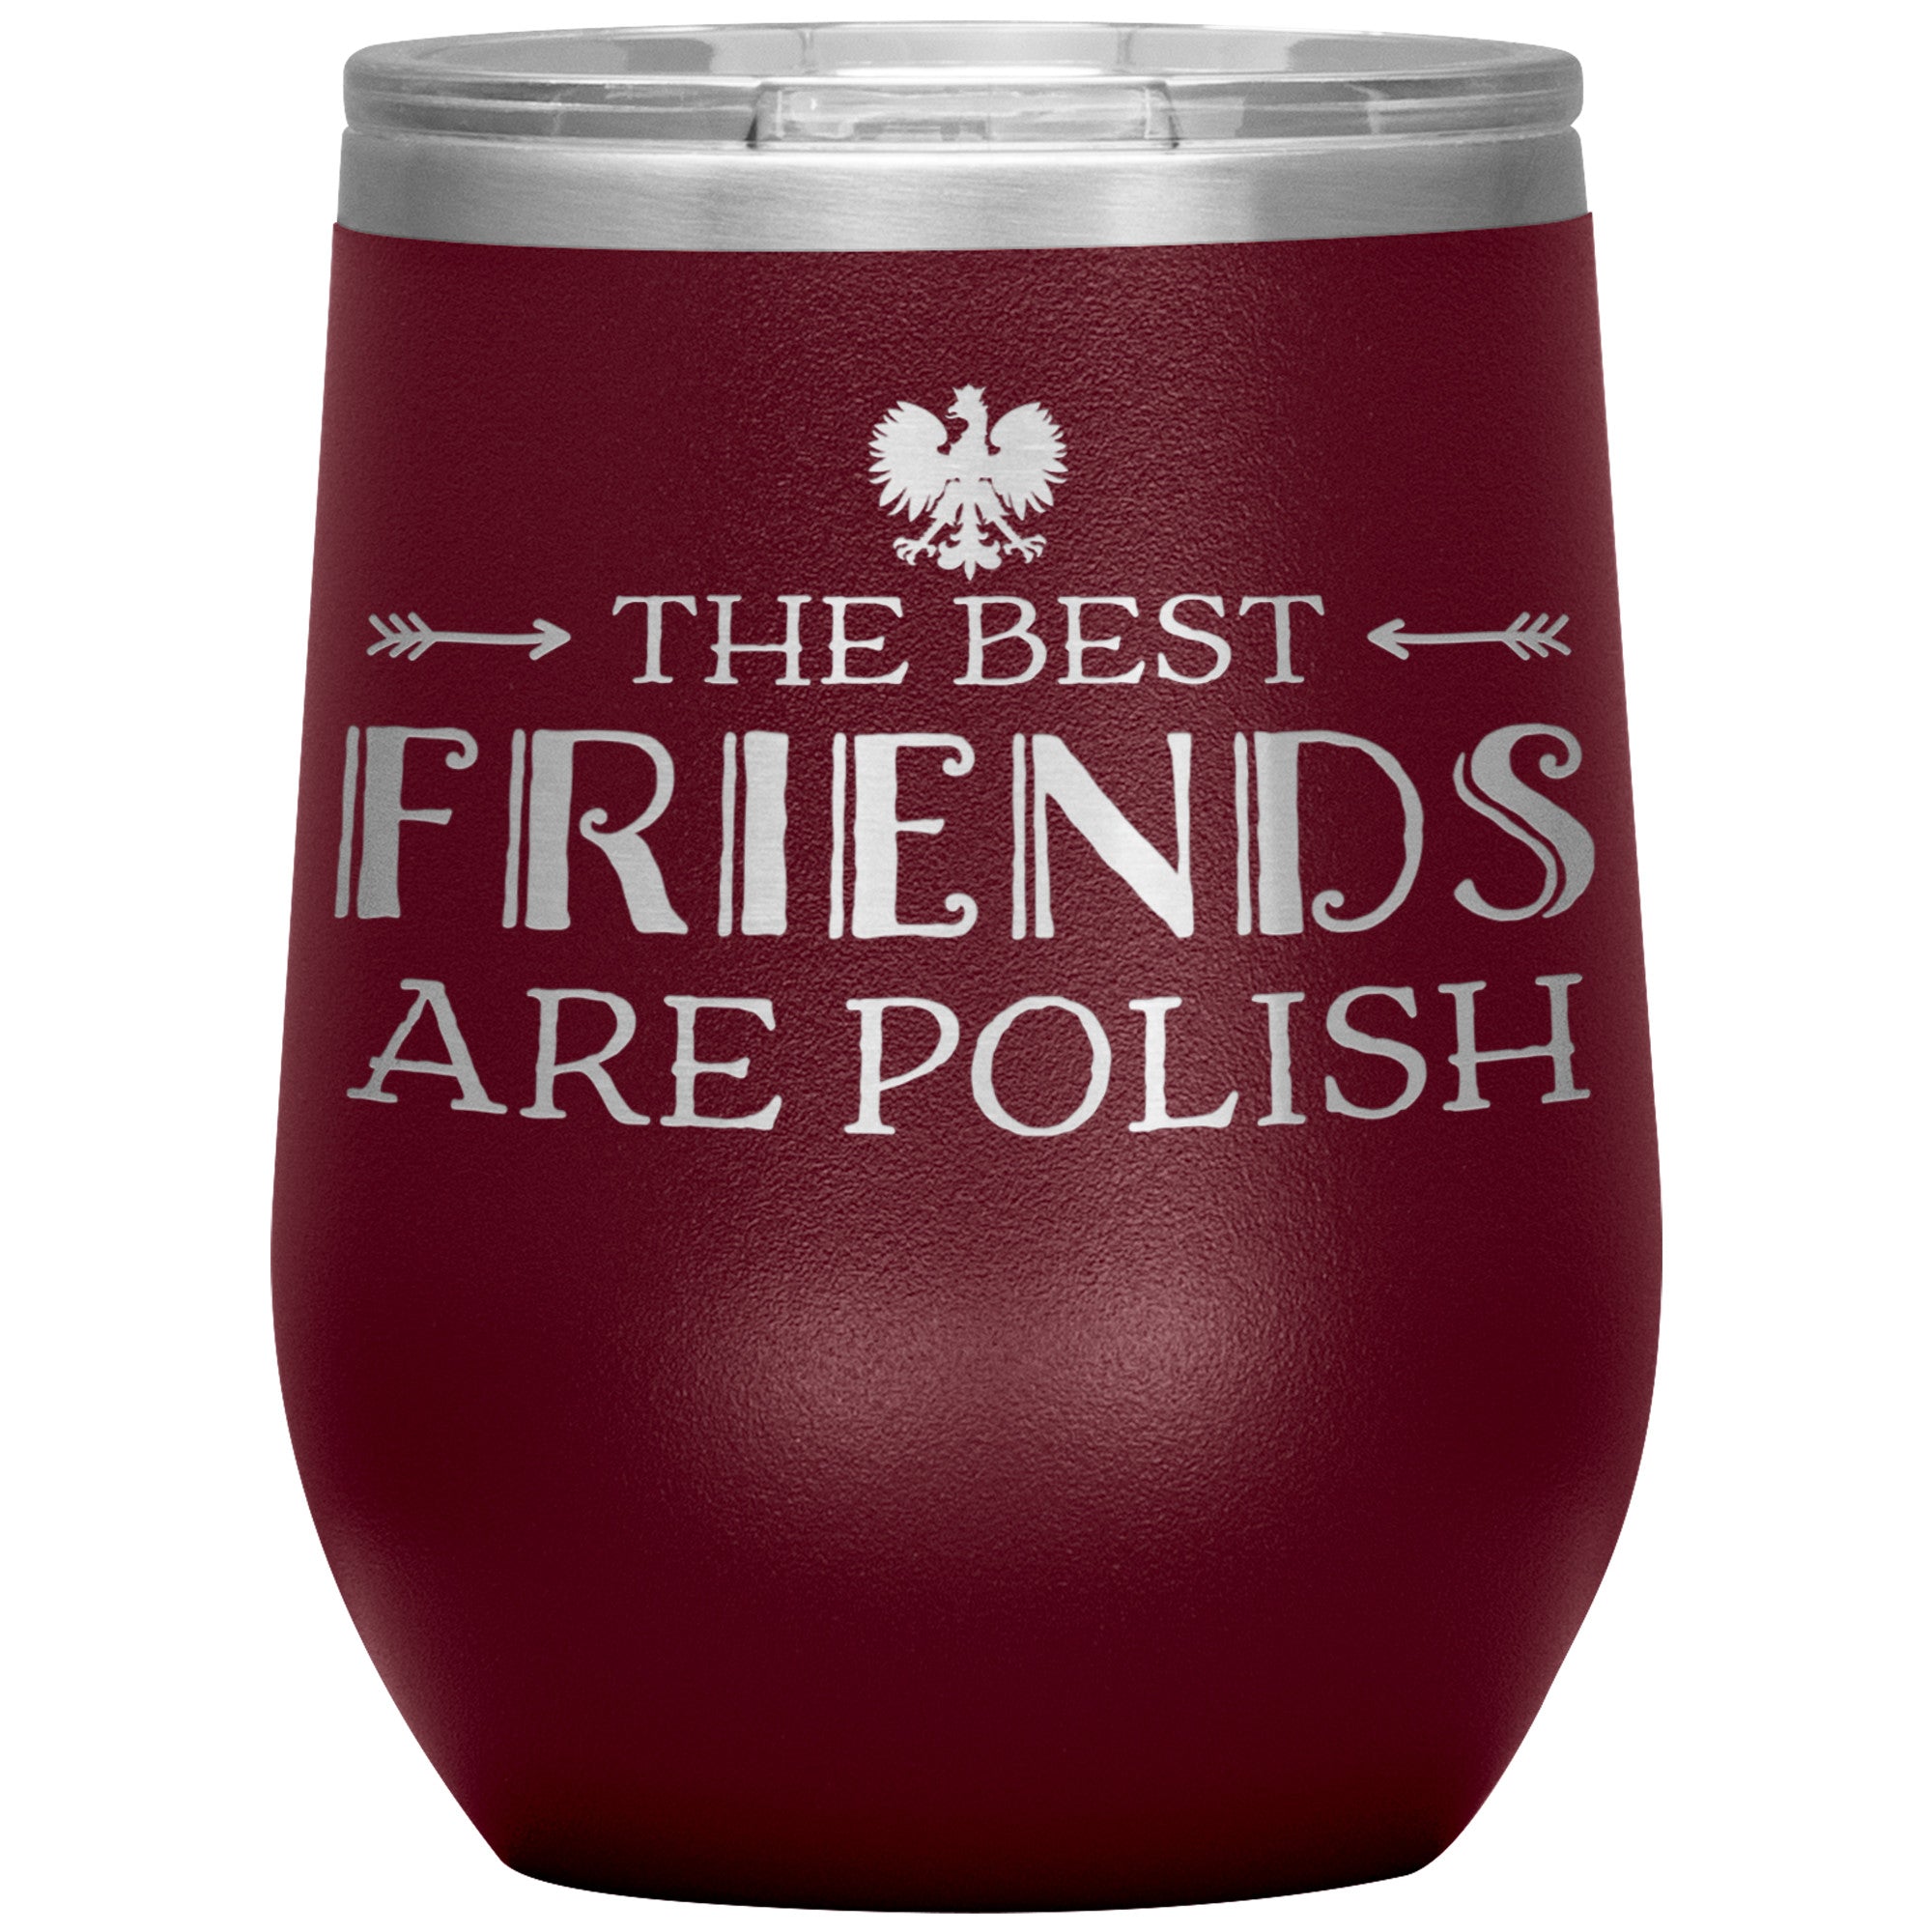 The Best Friends Are Polish Insulated Wine Tumbler Tumblers teelaunch Maroon  